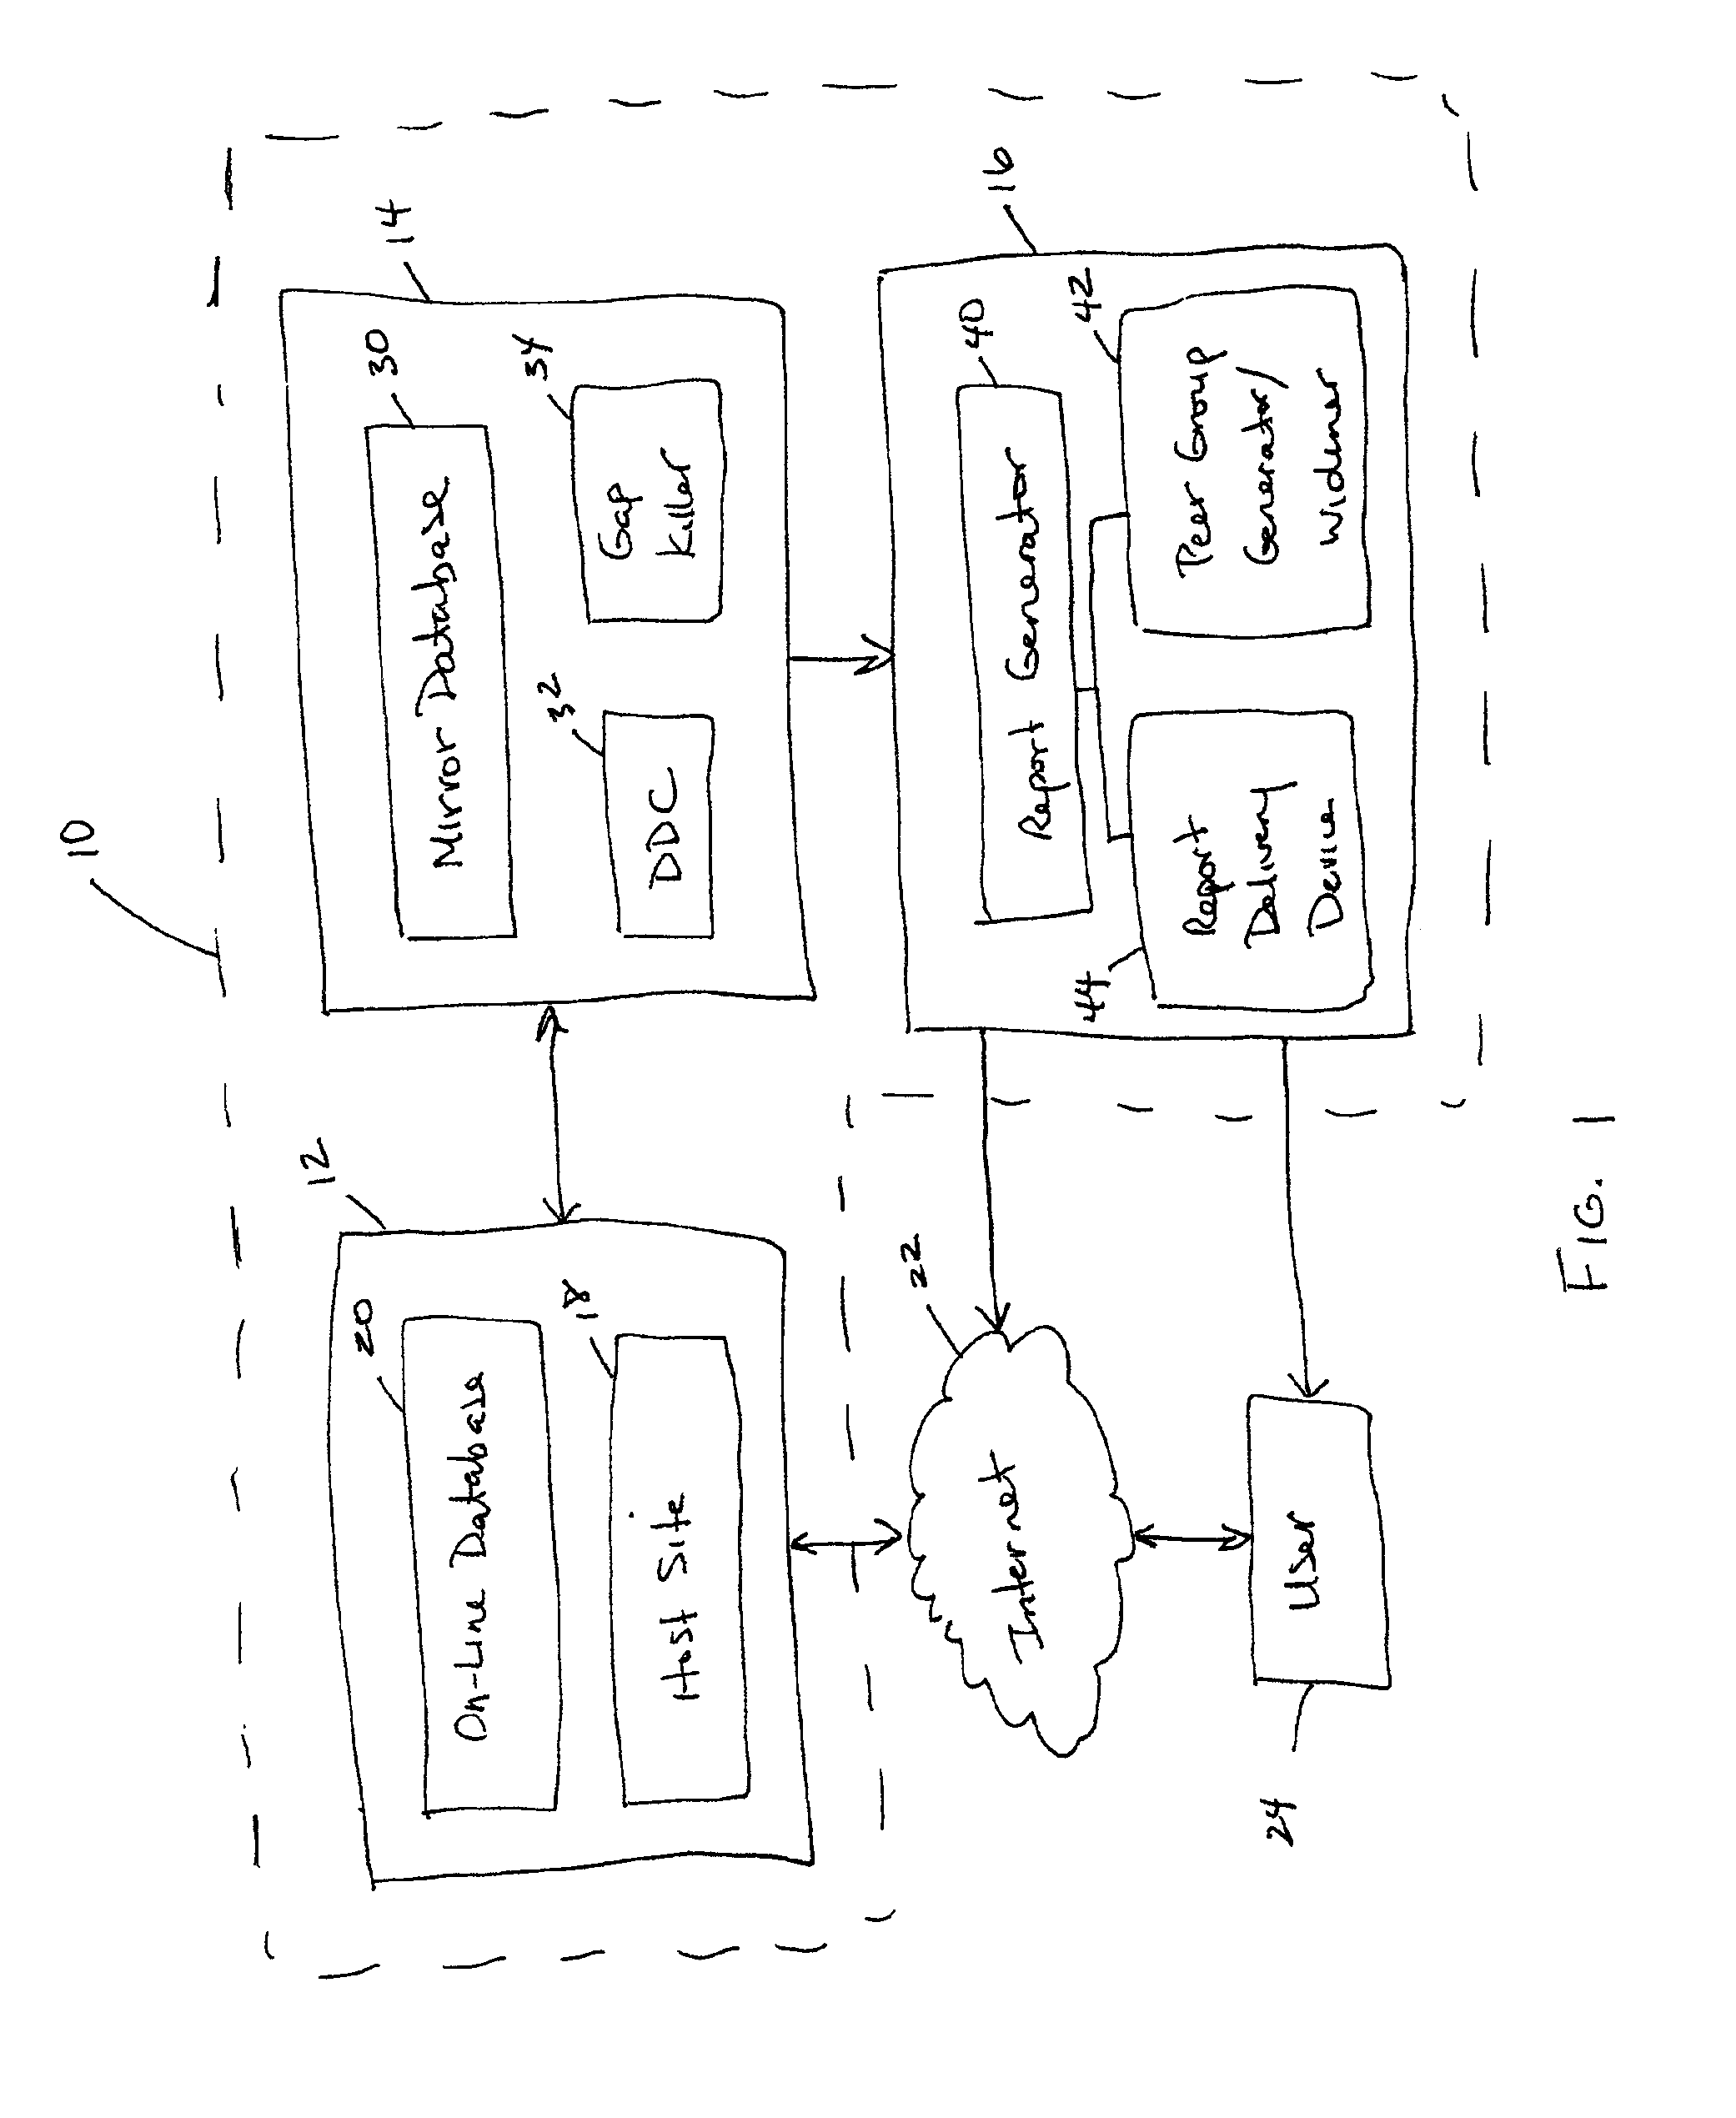 Performance evaluation through benchmarking using an on-line questionnaire based system and method